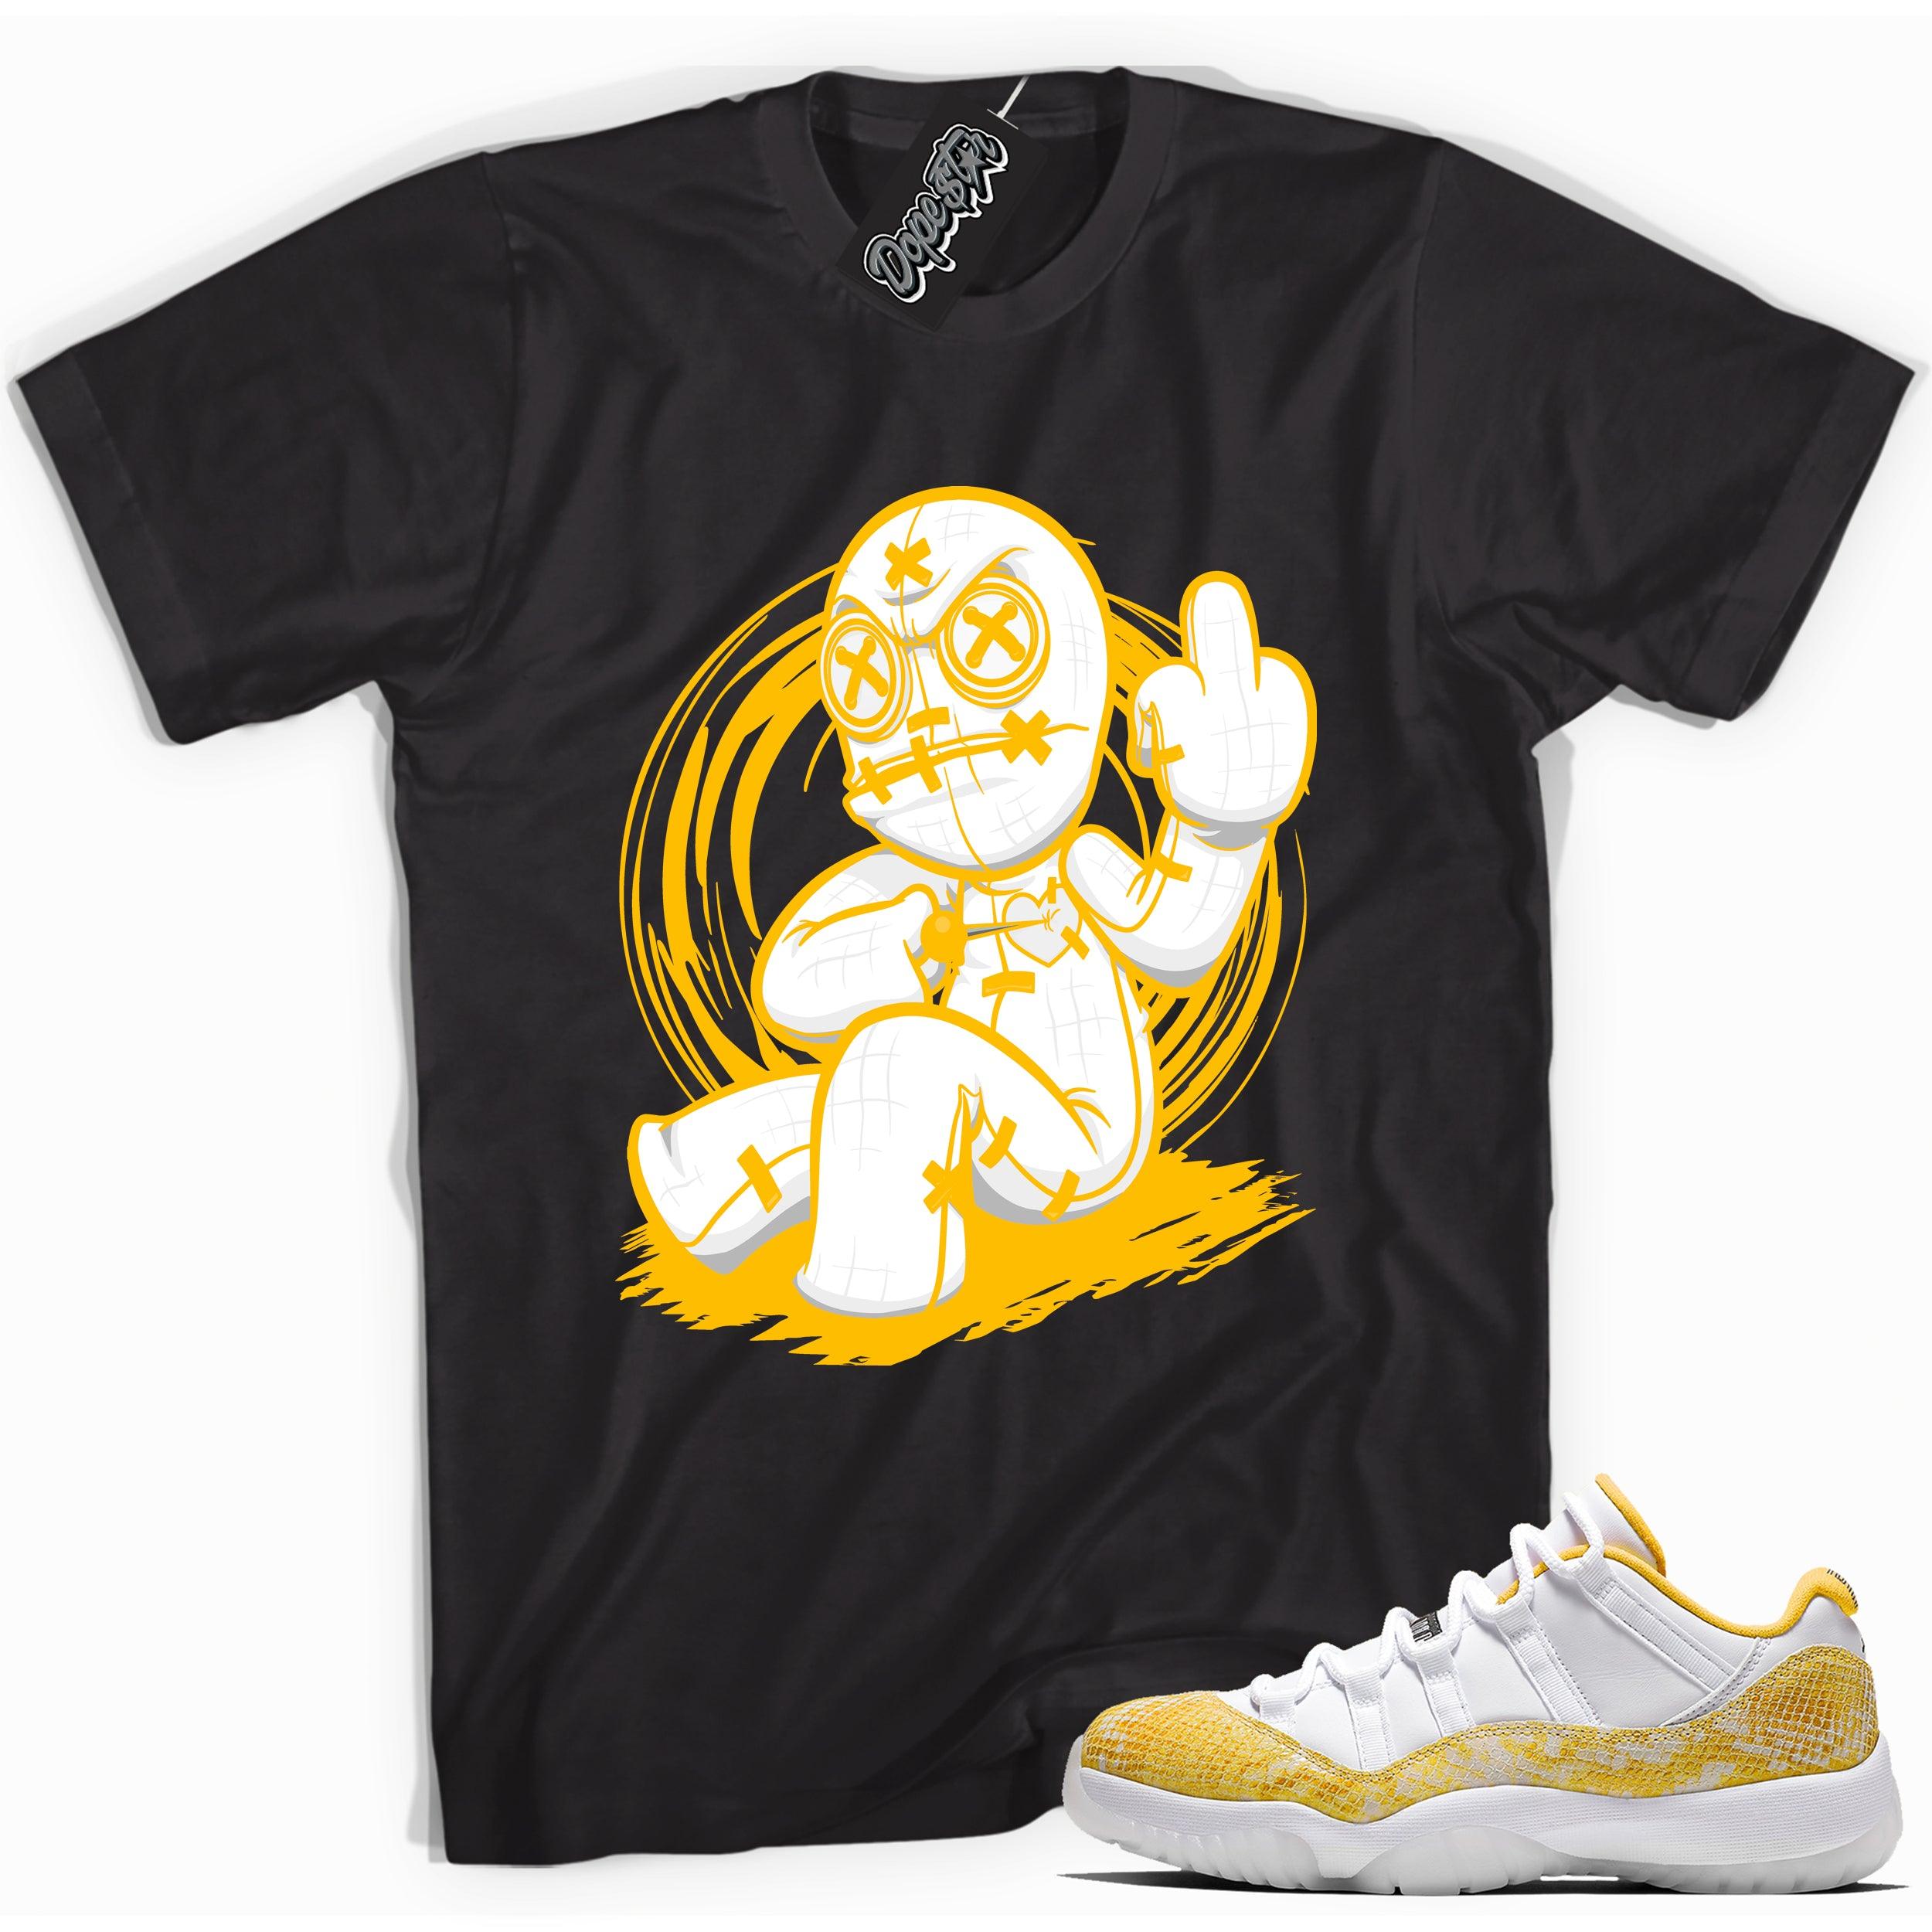 Cool black graphic tee with 'voodoo doll' print, that perfectly matches  Air Jordan 11 Retro Low Yellow Snakeskin sneakers